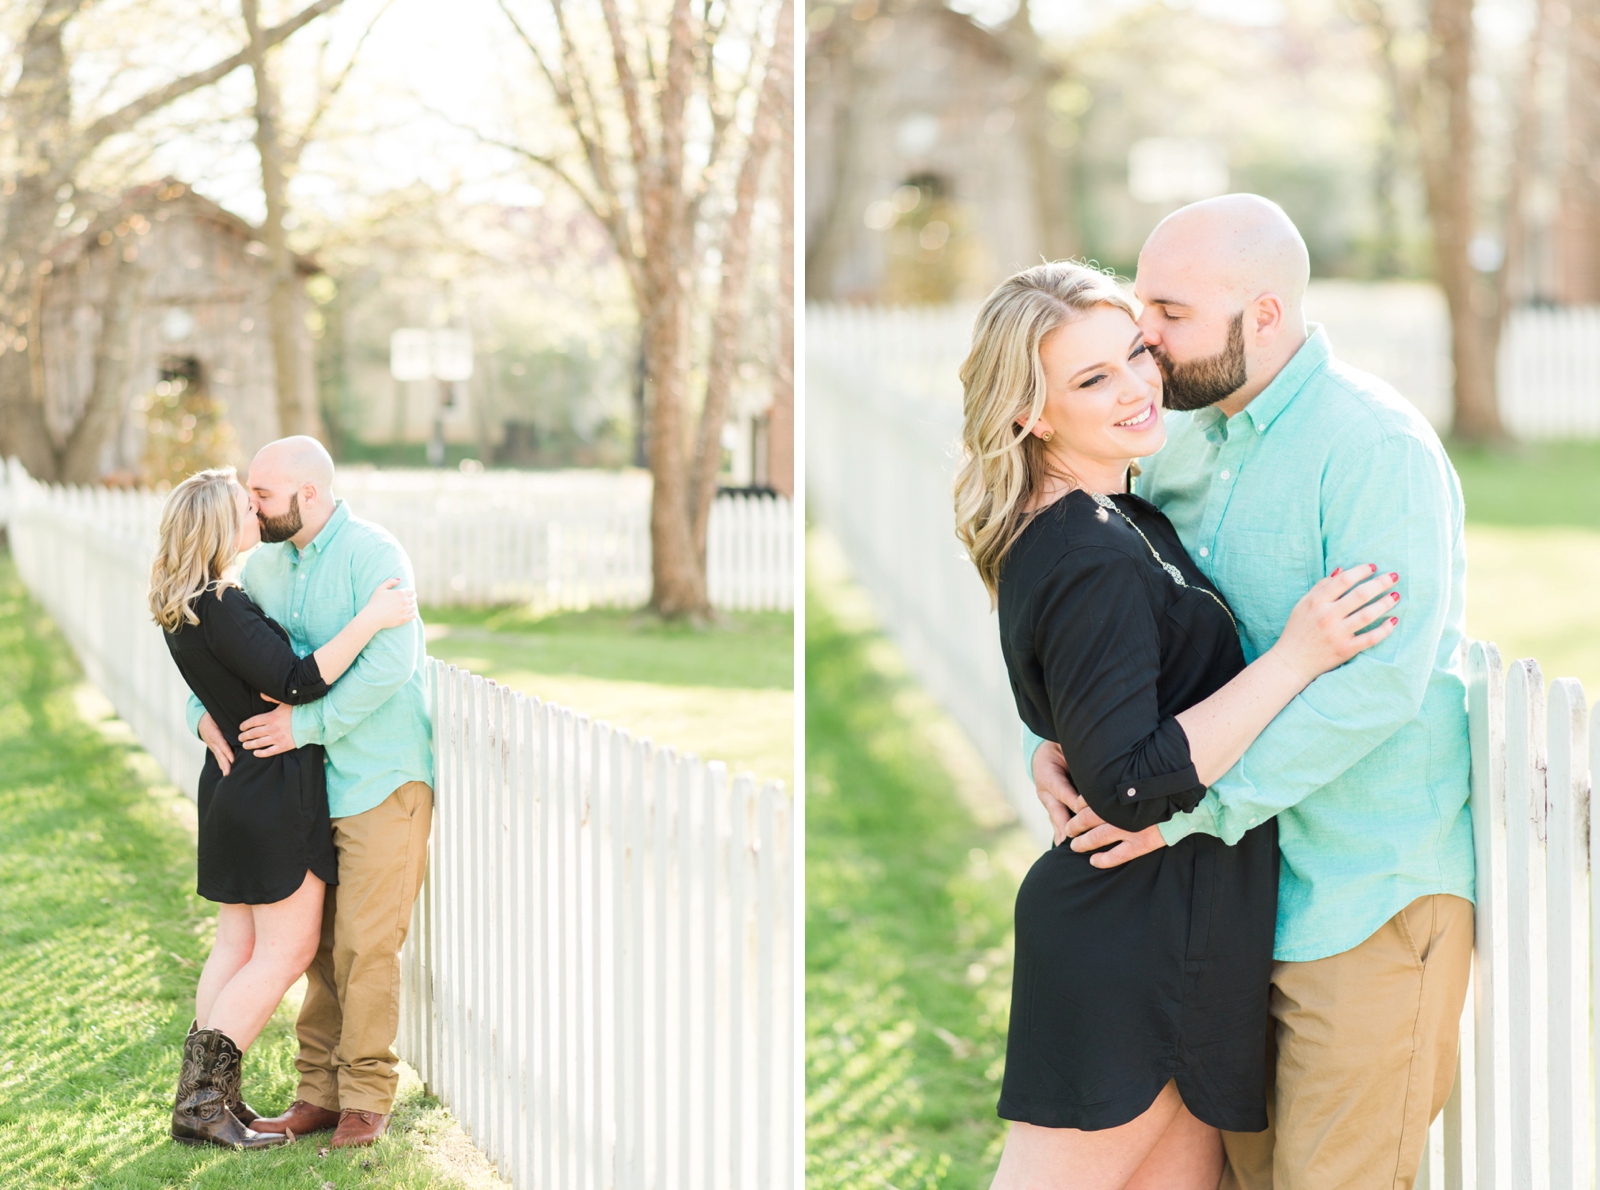 clifton virginia small town spring engagements with truck and lab dogs by va wedding photographer